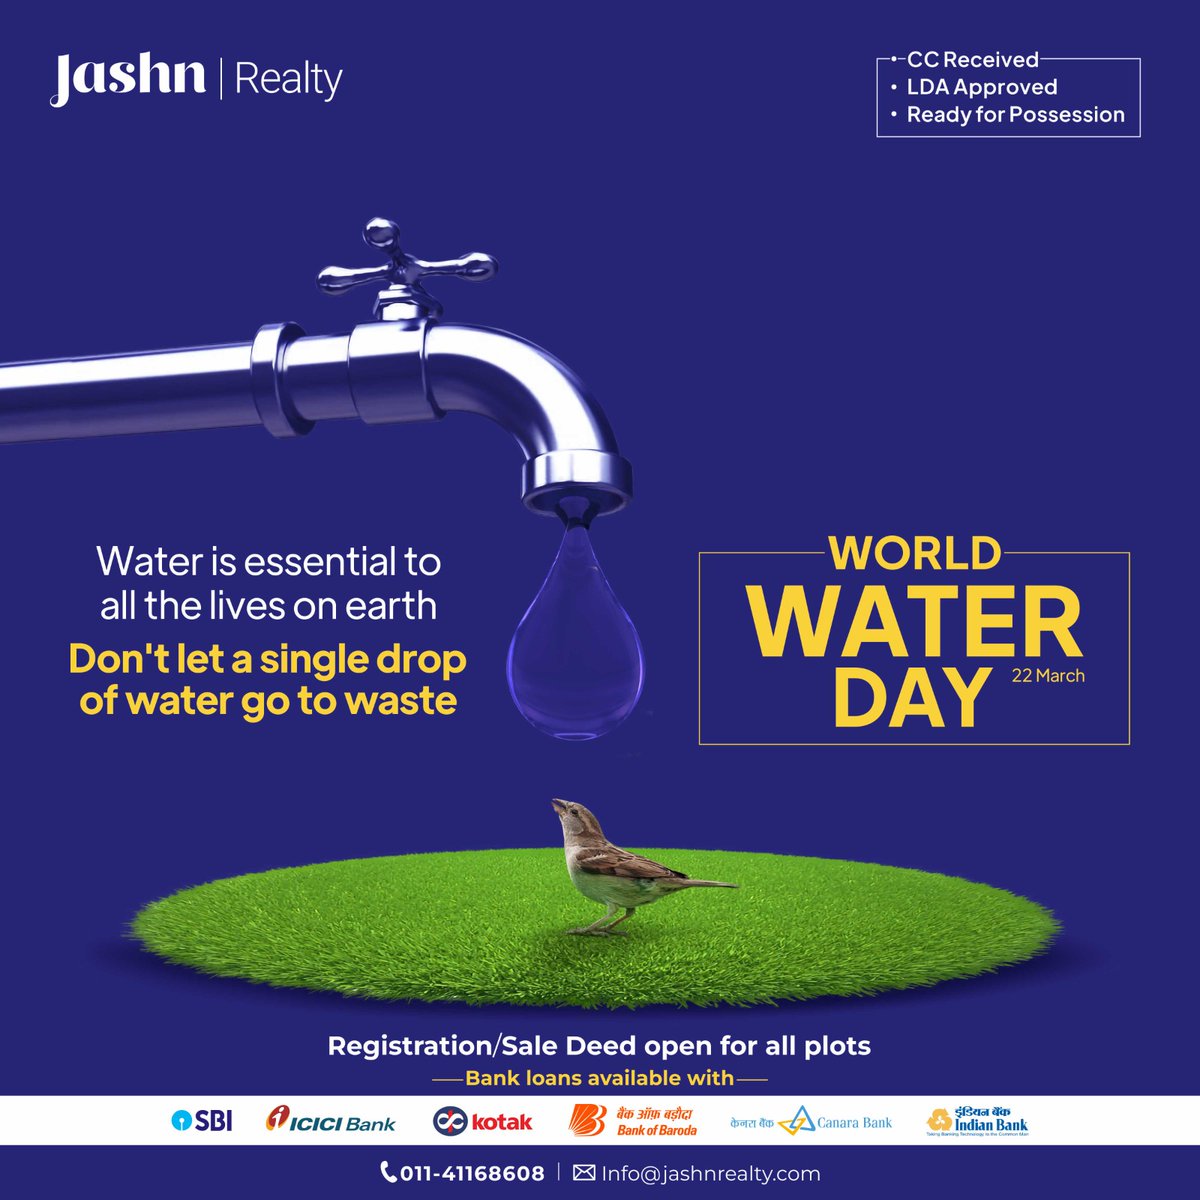 Water is one thing that defines life for all the organisms on this planet. Each effort made to conserve water can bring a big change to all of us. Warm wishes on the occasion of World Water Day!
.
.
#savewater #waterday #cleanwater #valuingwater #climatechange #water #waterday